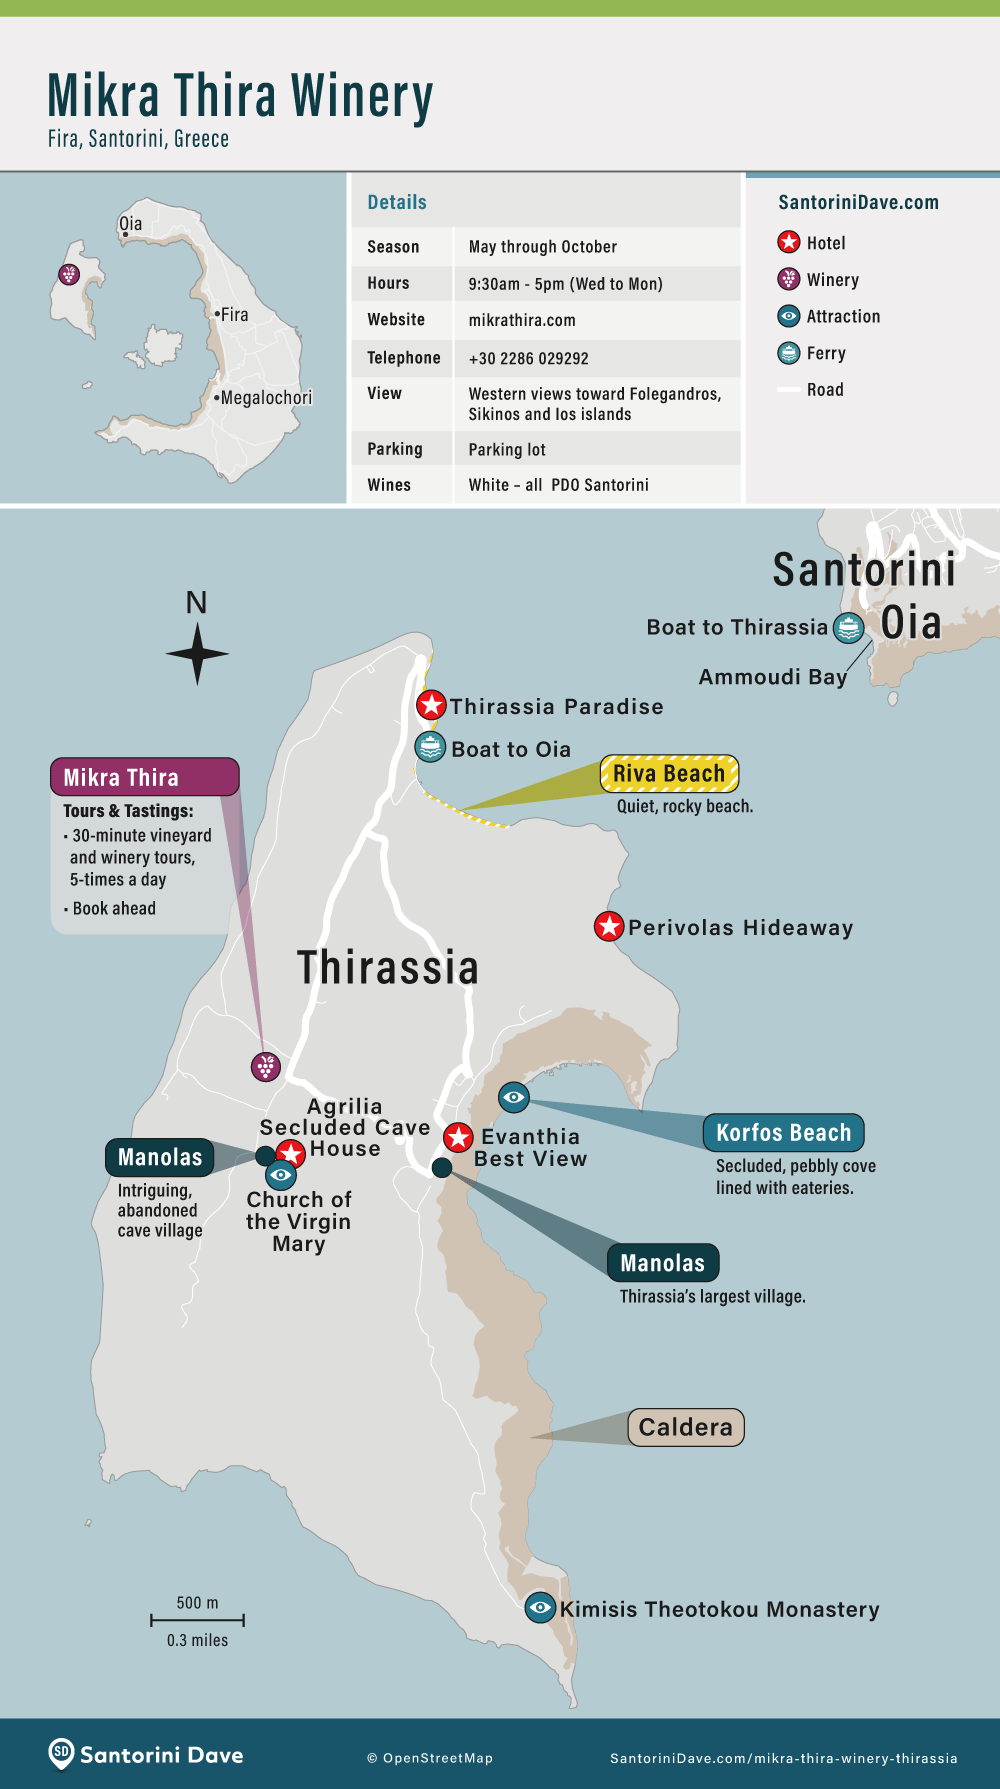 Map showing the location of Mikra Thira winery on the island of Thirassia in Greece.